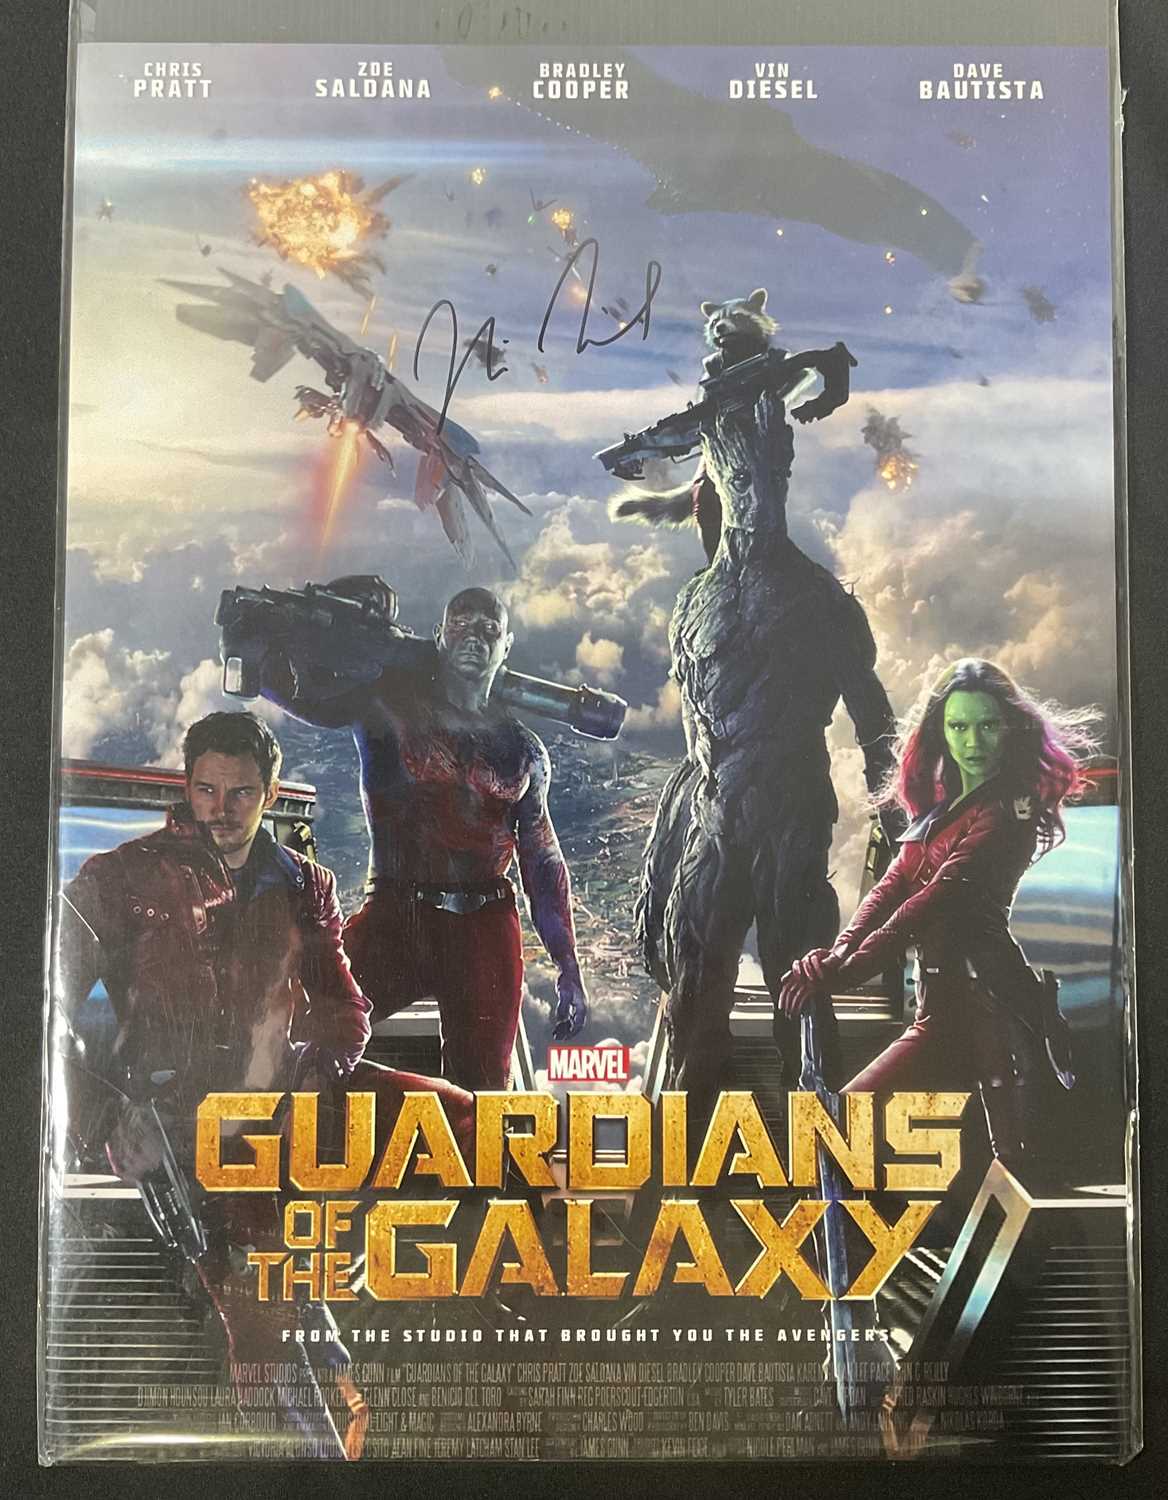 A mini poster for Guardians of the Galaxy signed by VIN DIESEL who voices Groot in the movies.